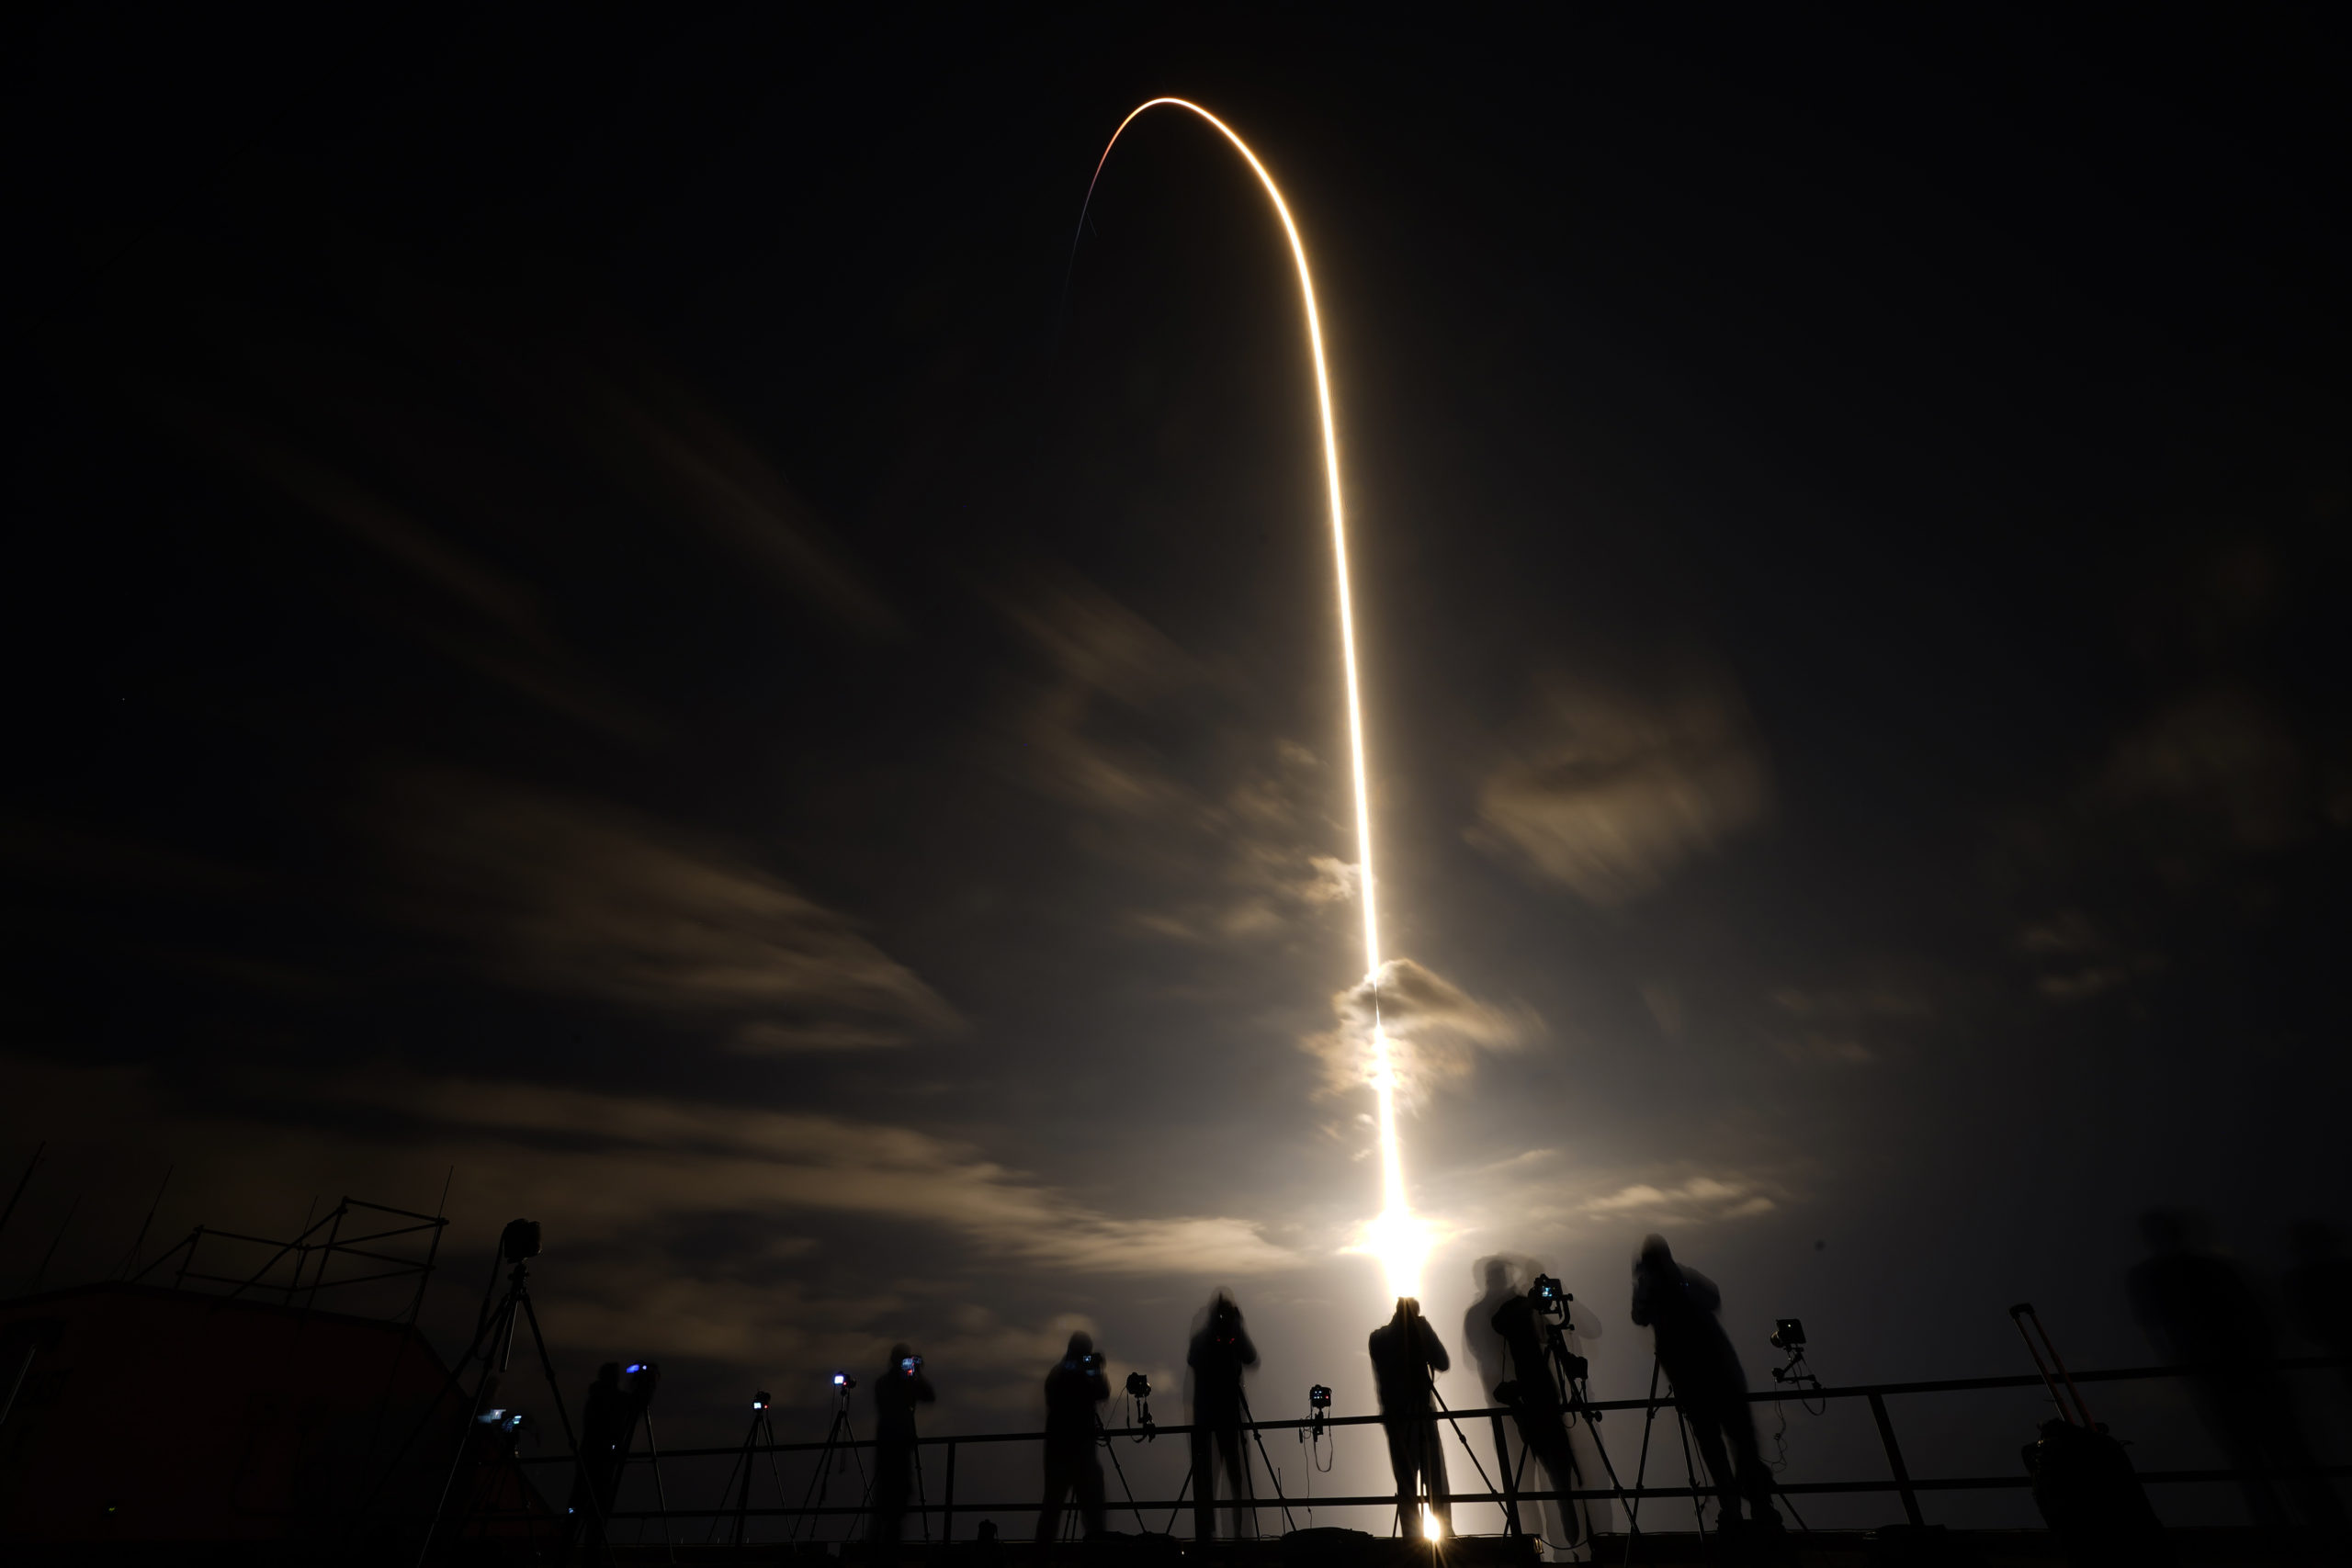 In this long exposure photo, a SpaceX Falcon 9 rocket lifts off from Launch Complex 39A at the Kennedy Space Center in Cape Canaveral, Fla., carrying four astronauts to the International Space Station, on Friday, April 23, 2021. (AP Photo/Chris O'Meara)